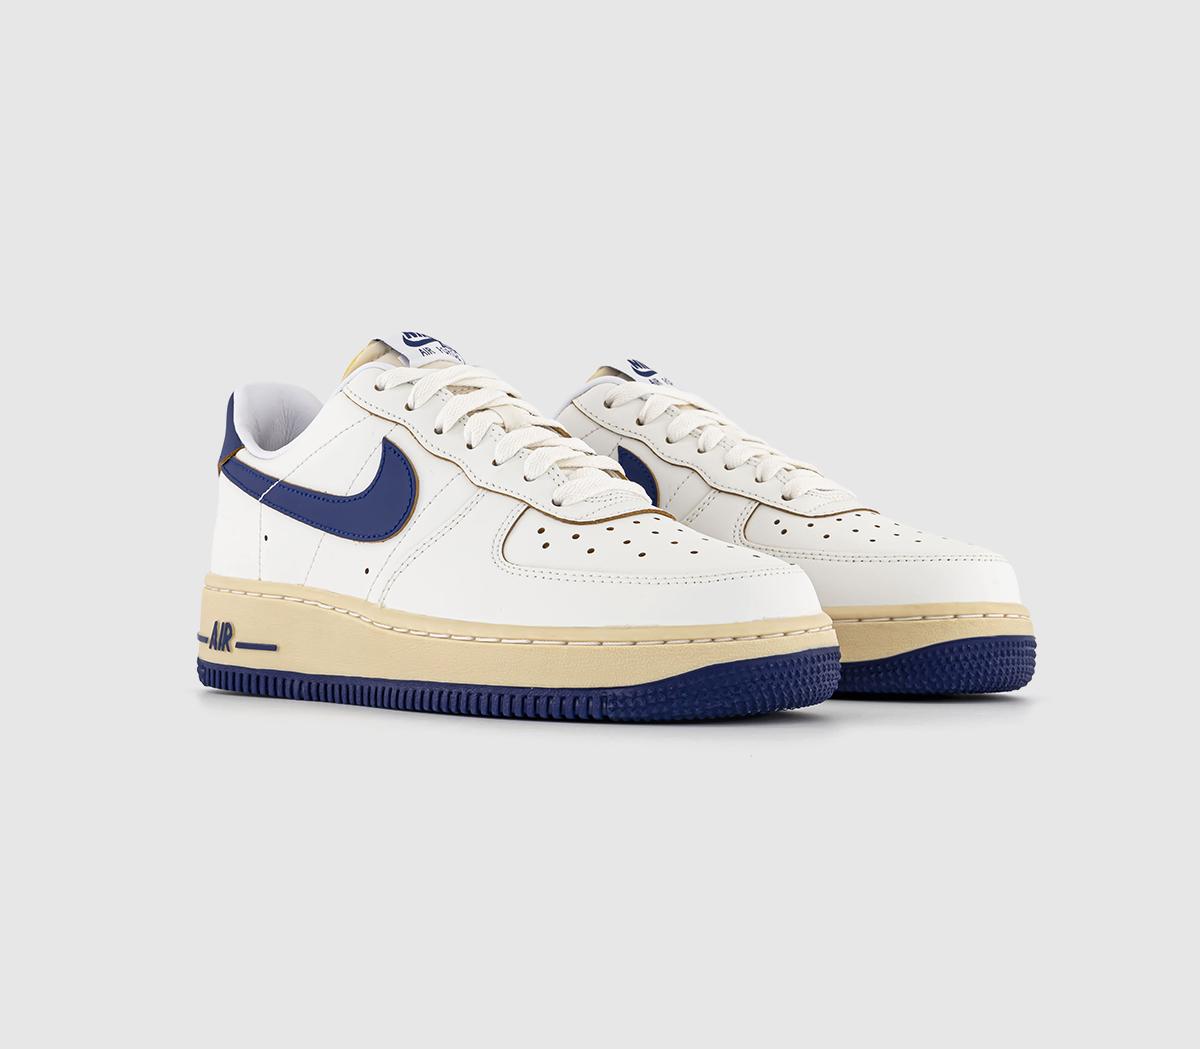 Nike Womens Air Force 1 07 Trainers Sail Deep Royal Blue Pale Vanilla Gold Suede White, 6.5